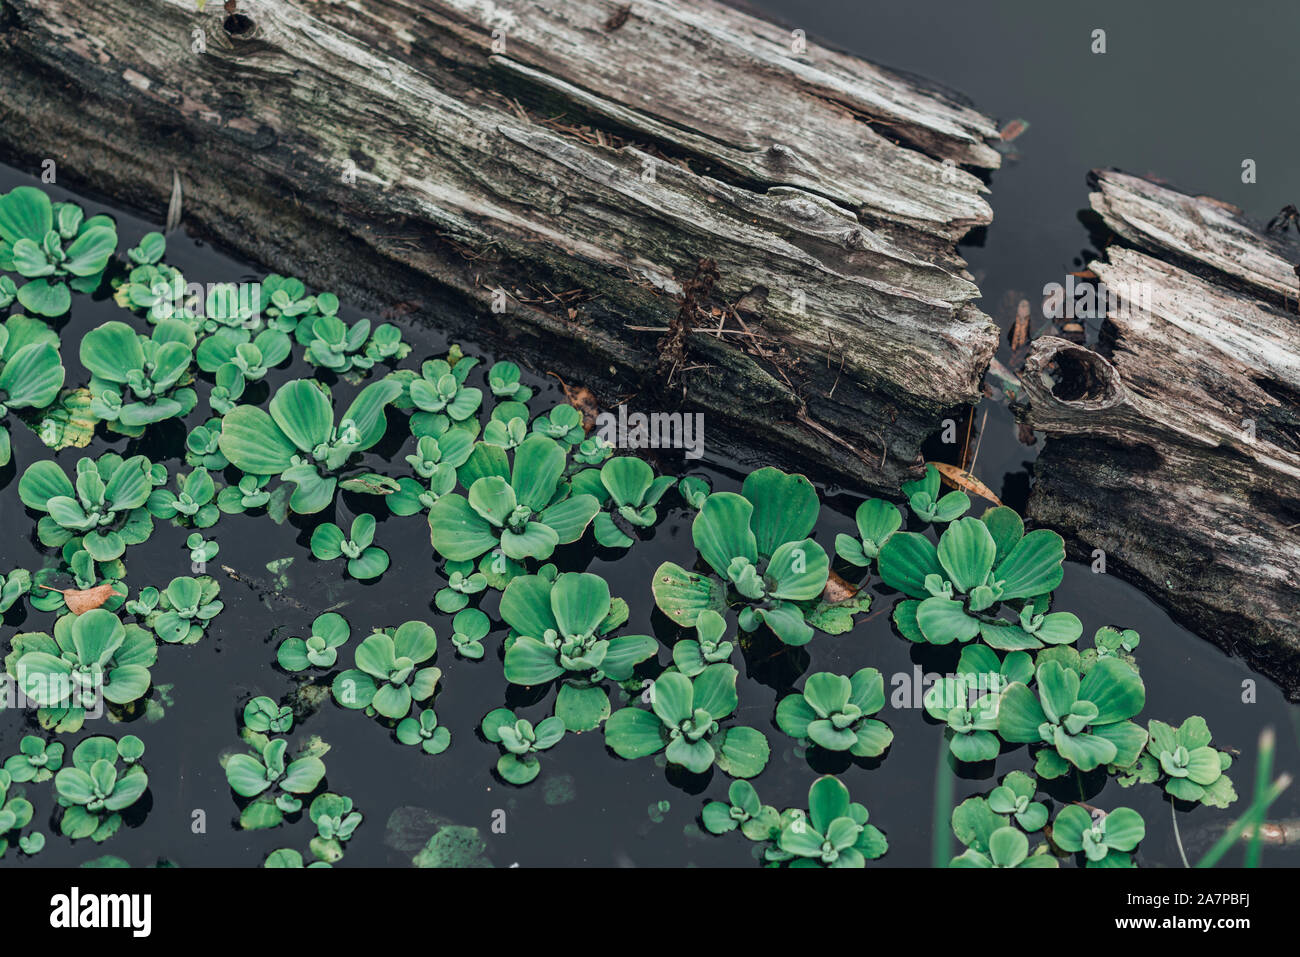 Driftwood in pond with green plants in water, snag. Stock Photo